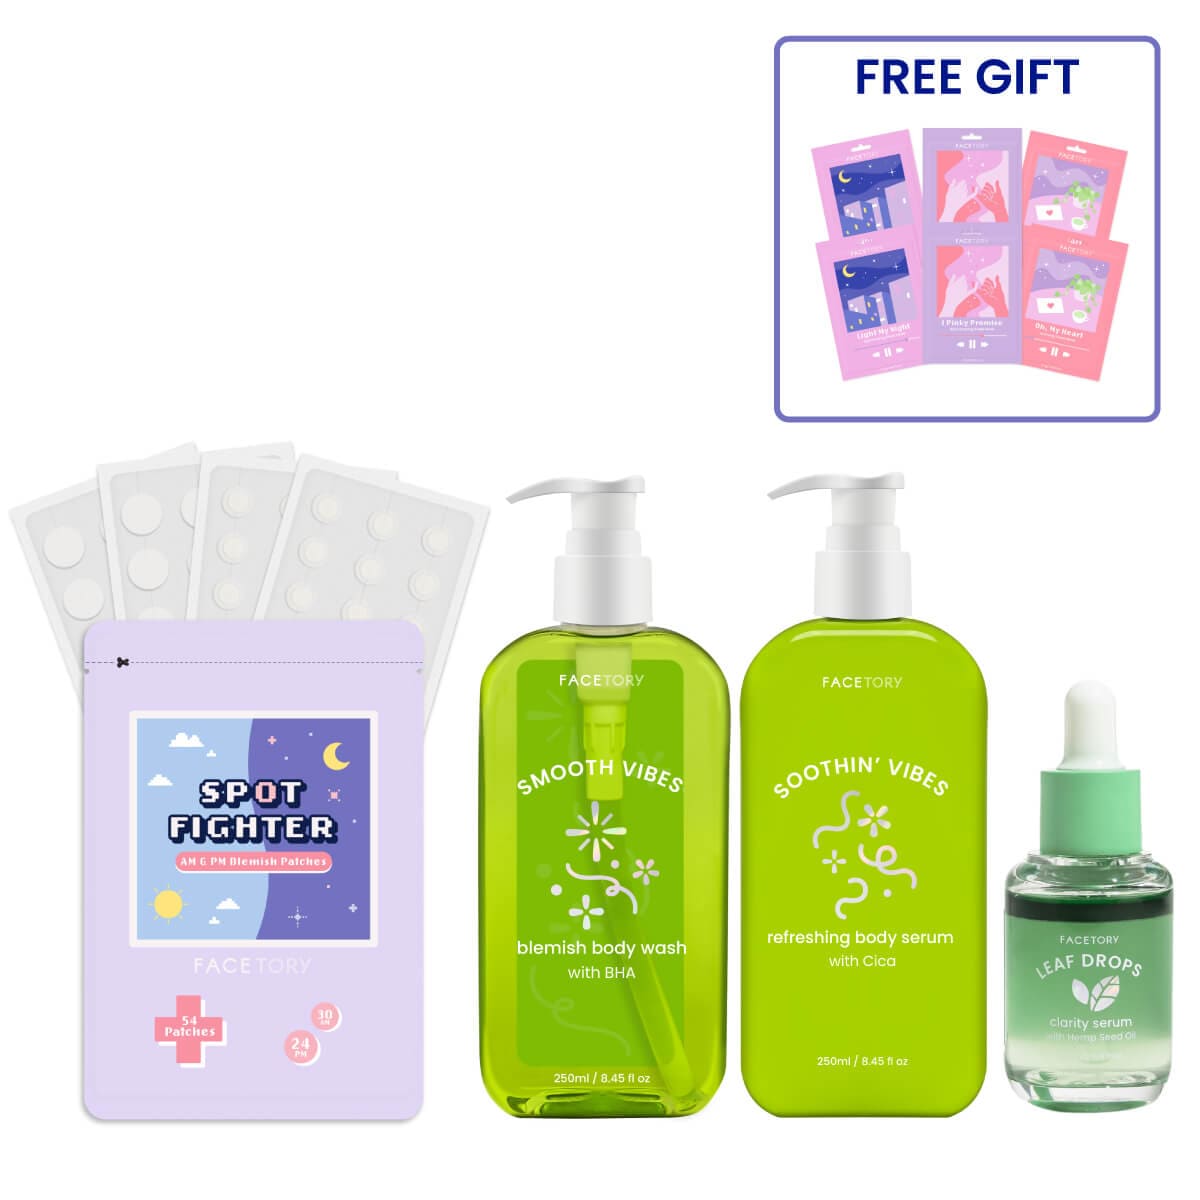 FaceTory Acne Treatment Set Save 30% OFF + Get a FREE Gift